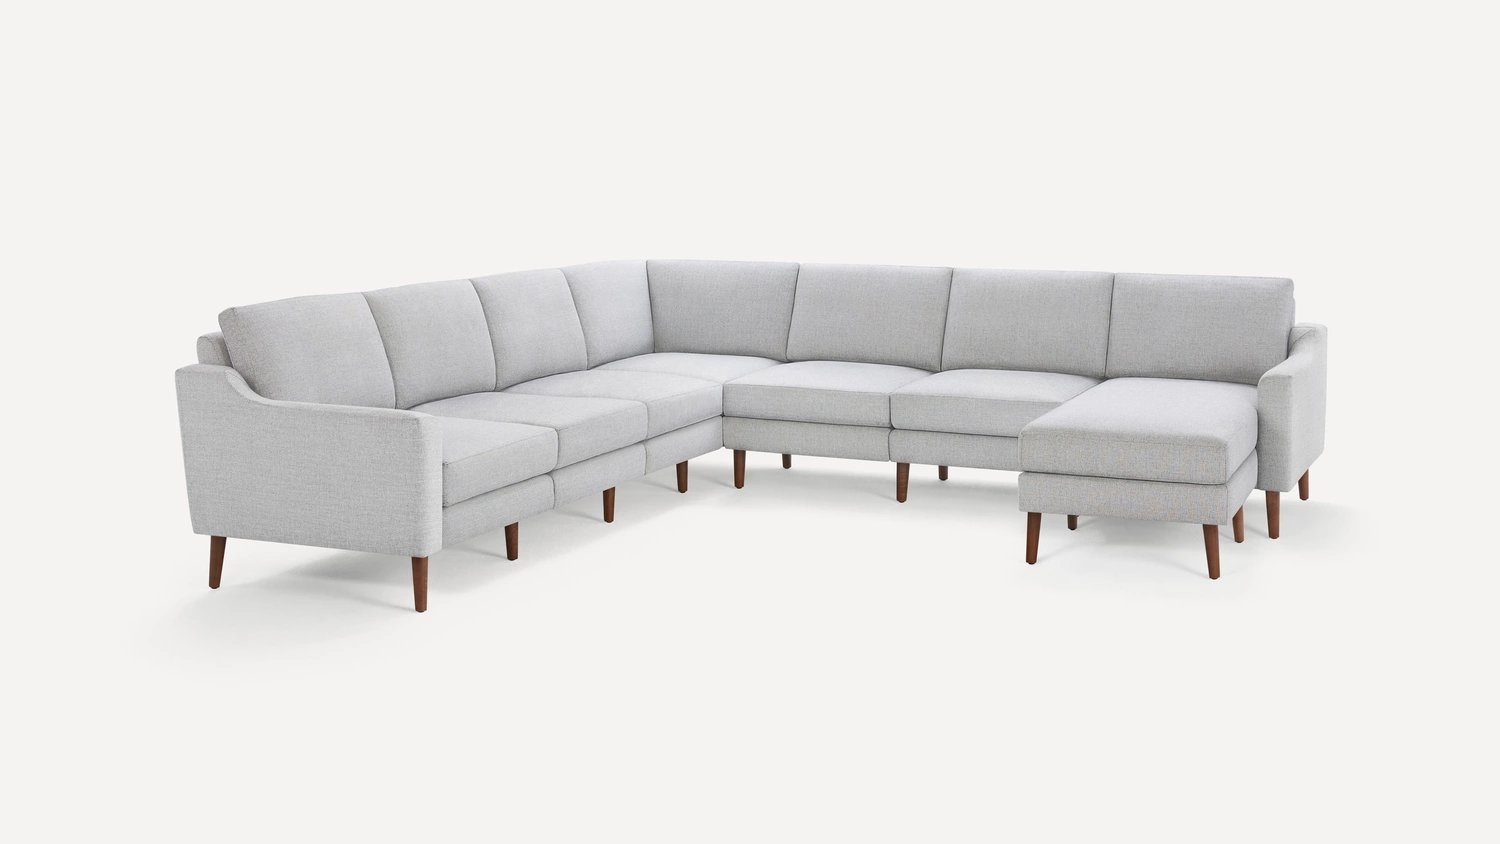 Slope Nomad 7-Seat Corner Sectional + Movable chaise - Image 1